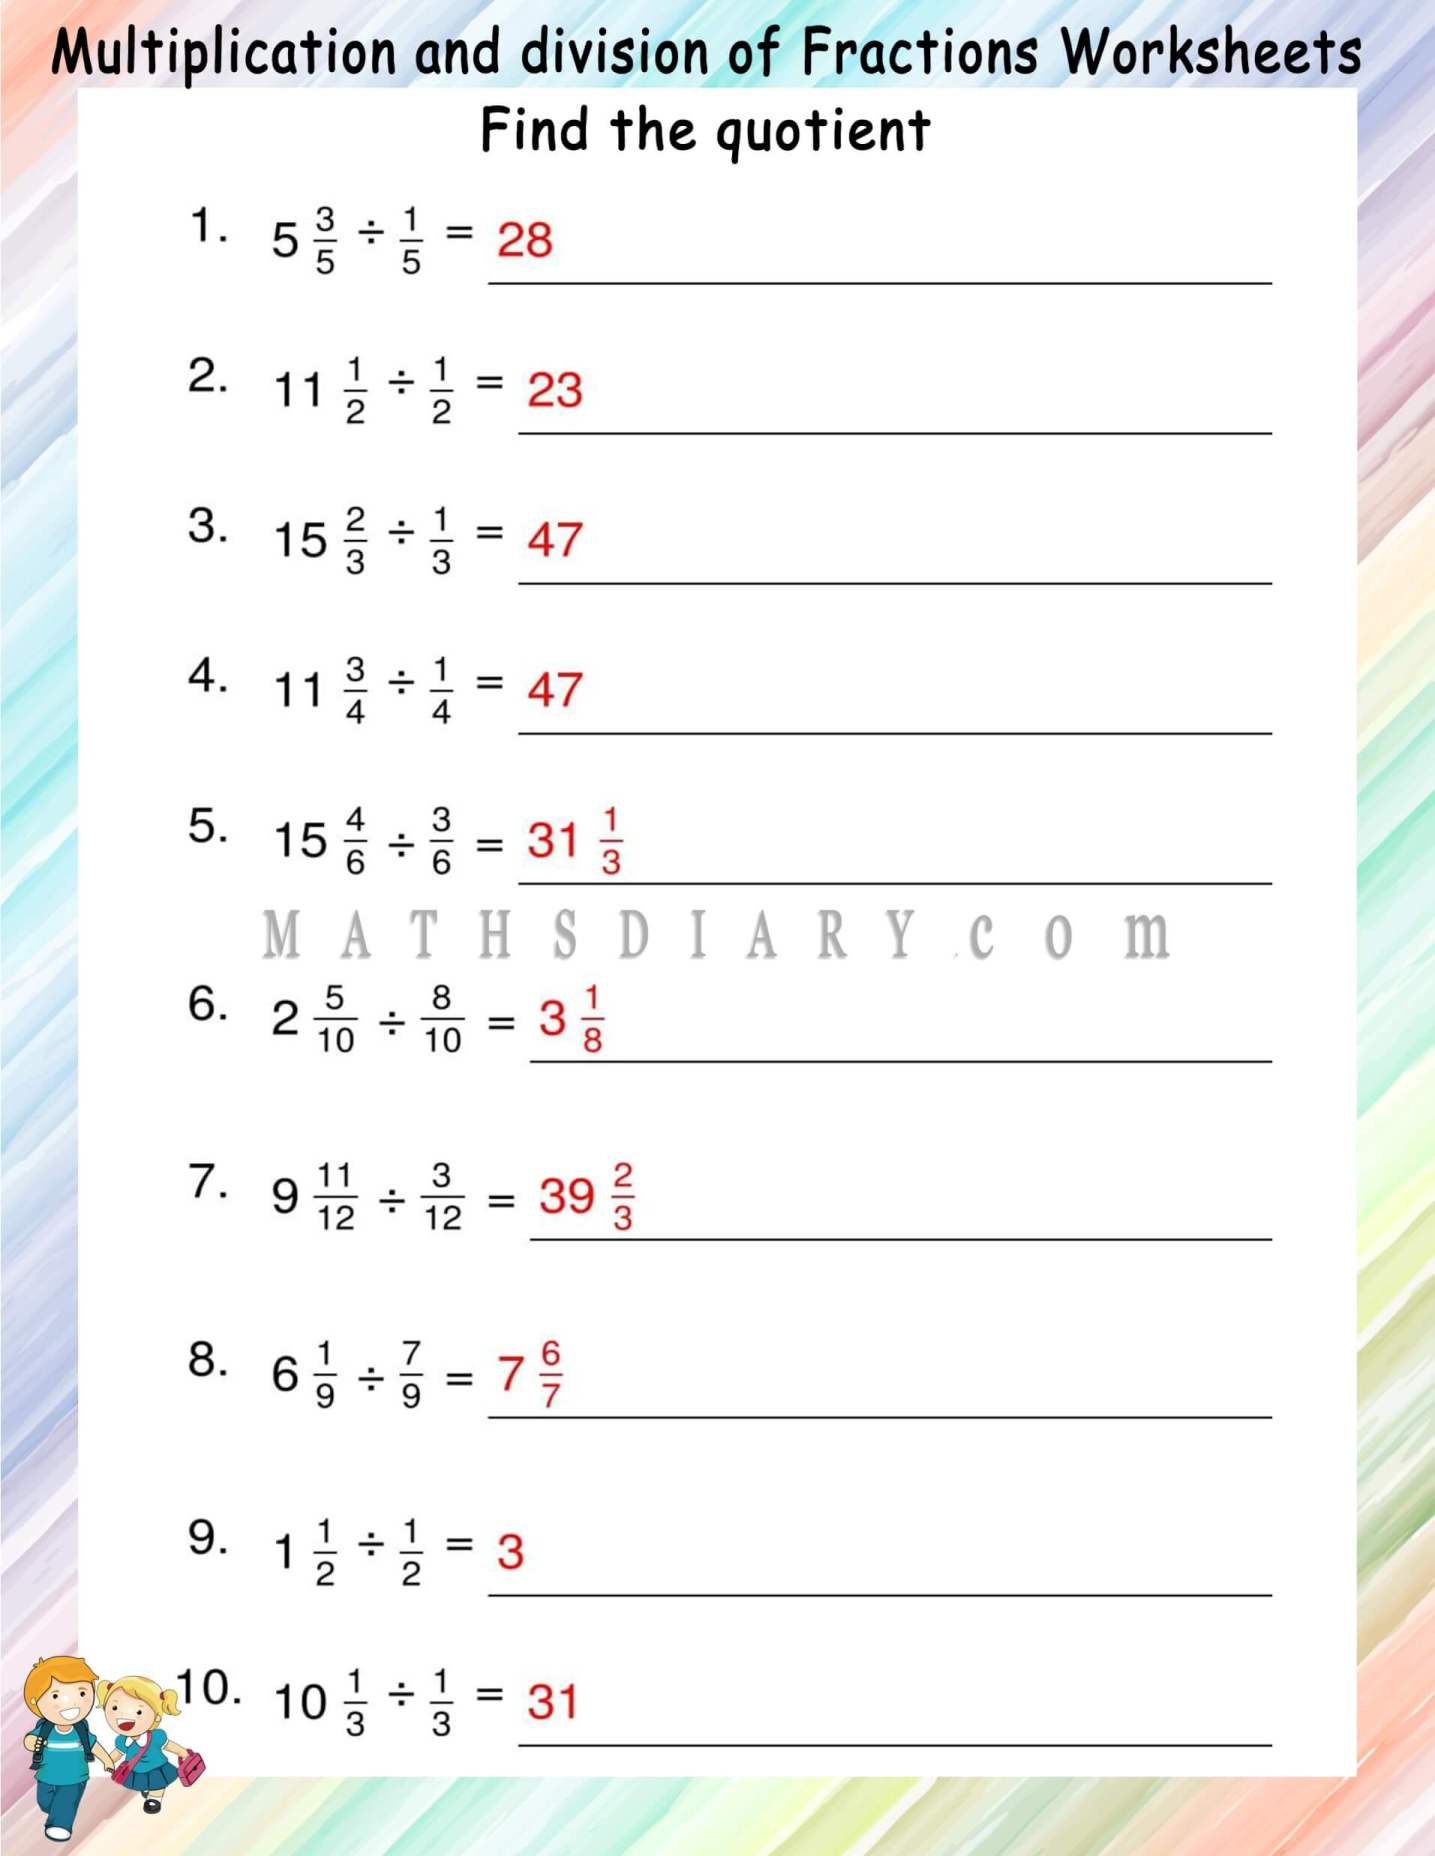 search-results-for-dividing-fractions-with-whole-numbers-worksheets-calendar-2015